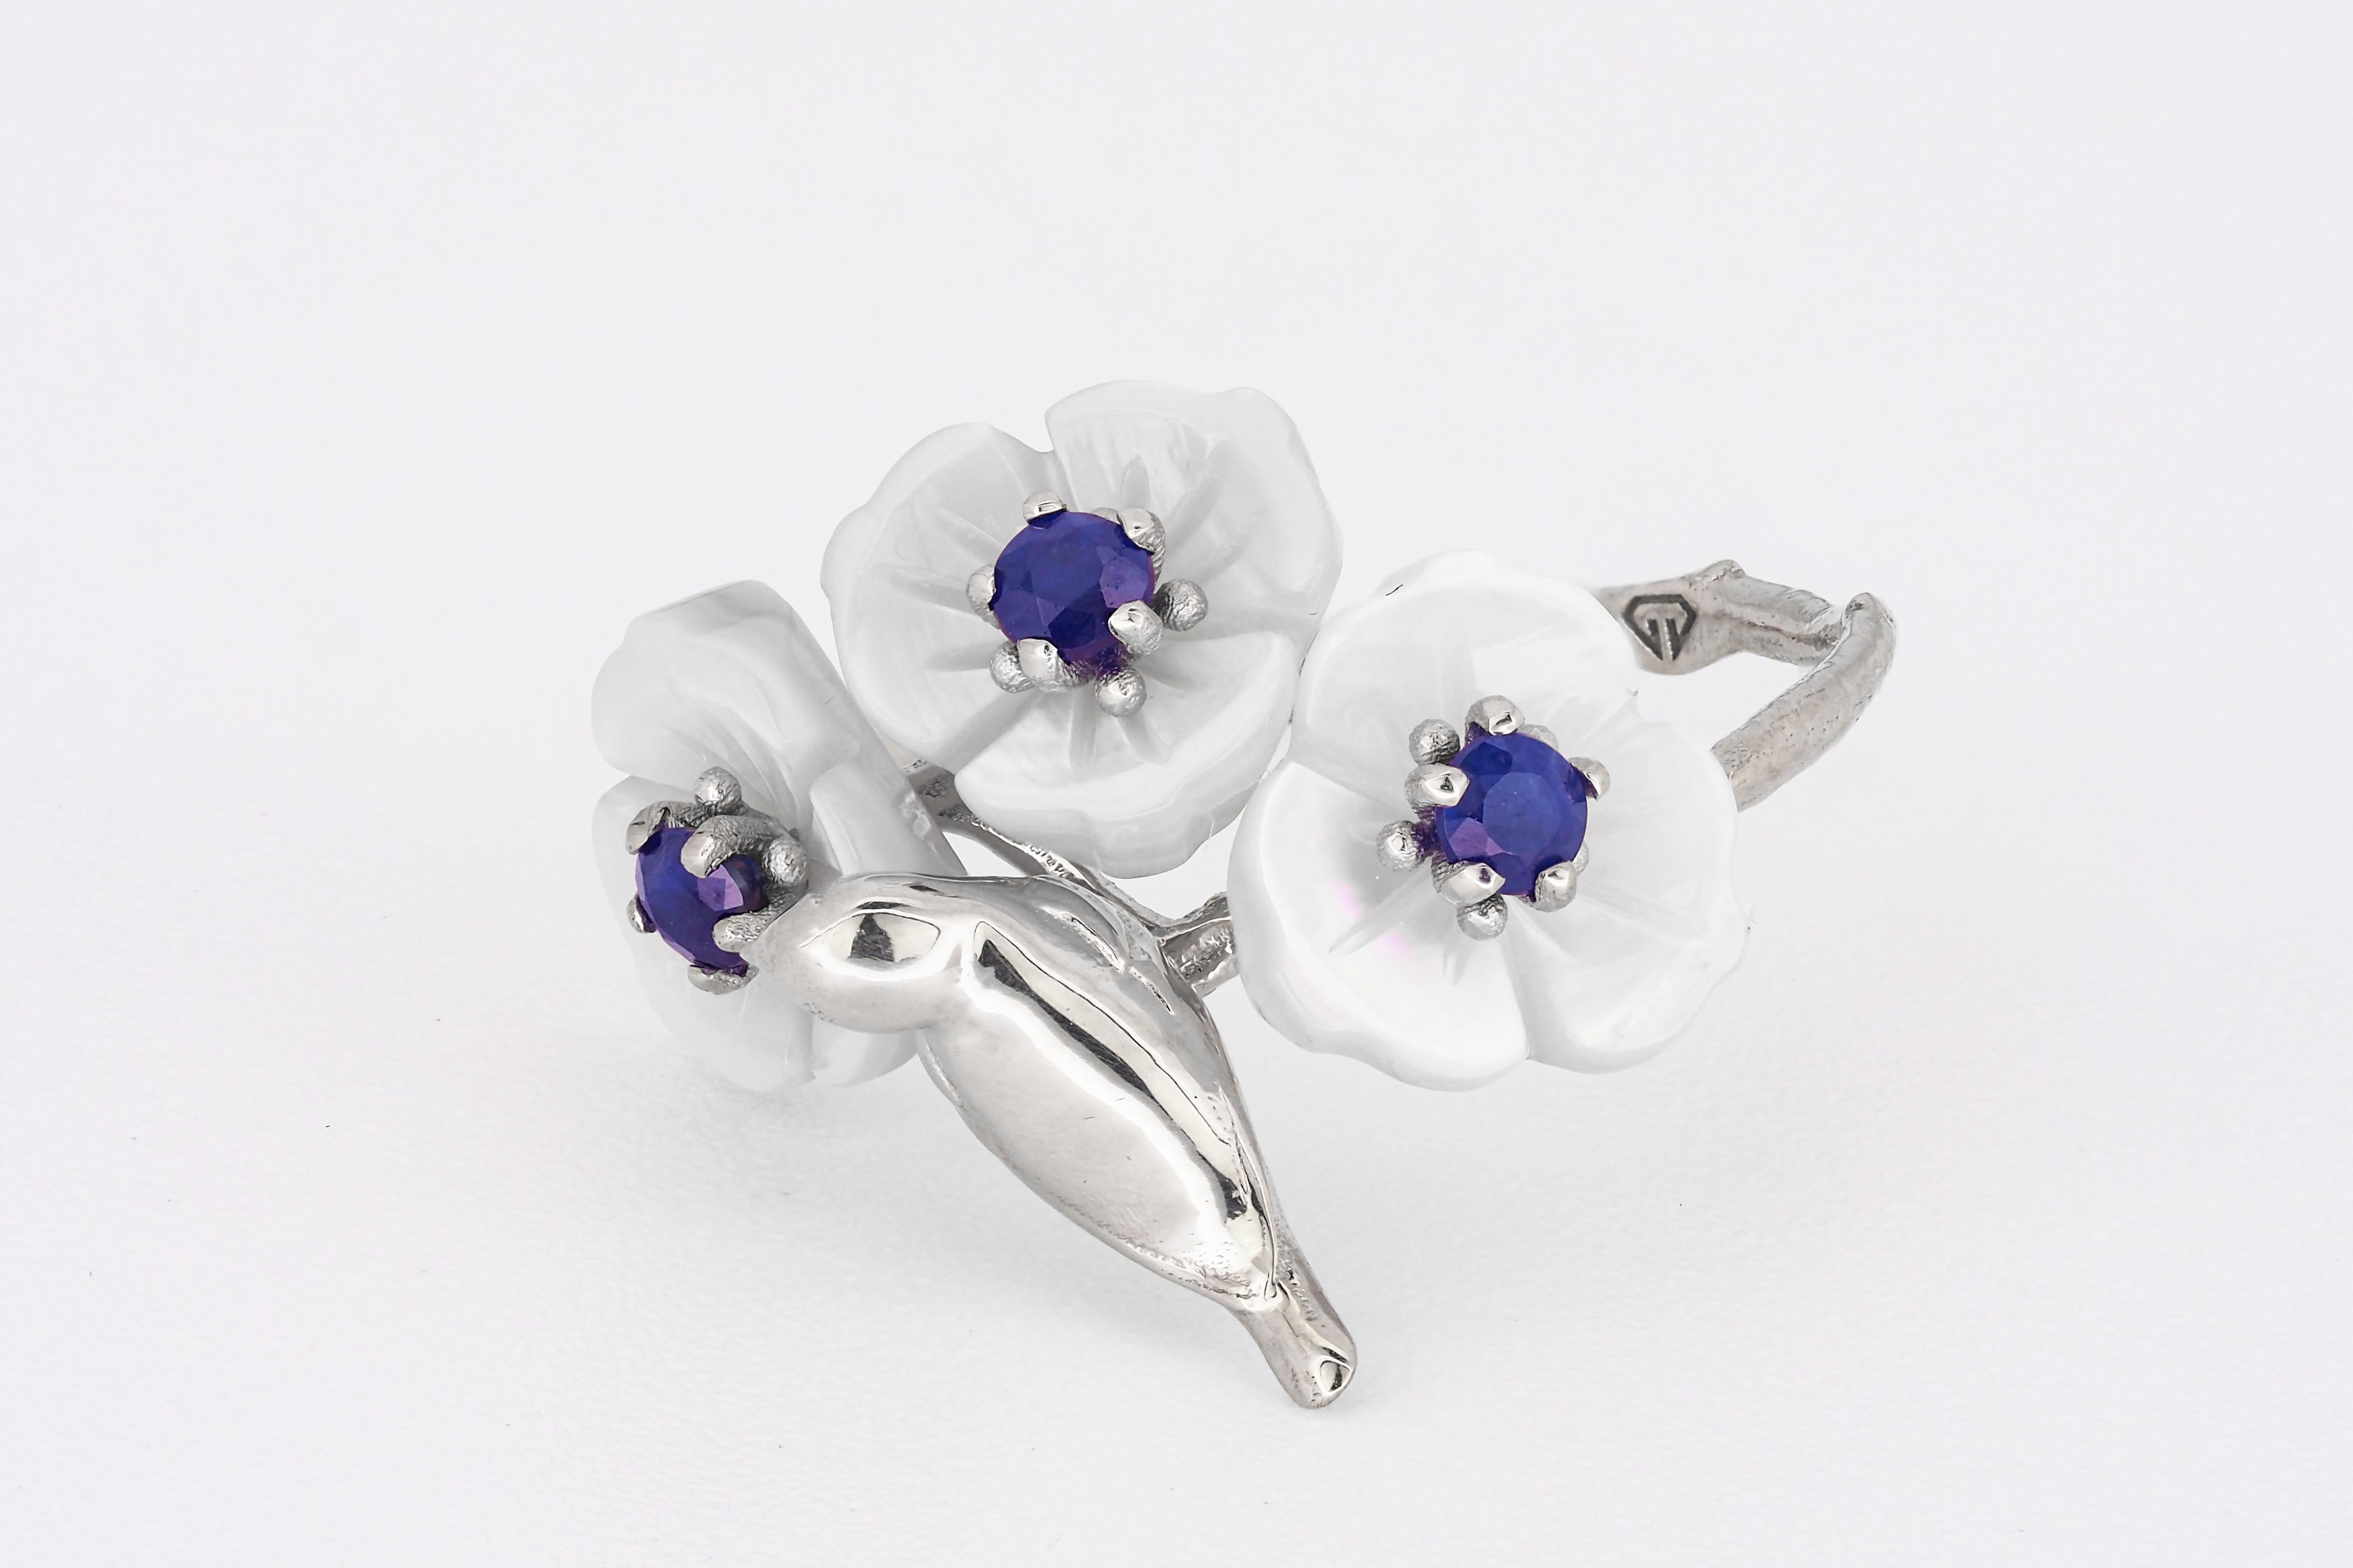 Modern 14k Gold Bird on Branch Ring with Sapphires and Carved Mother of Pearl Flowers